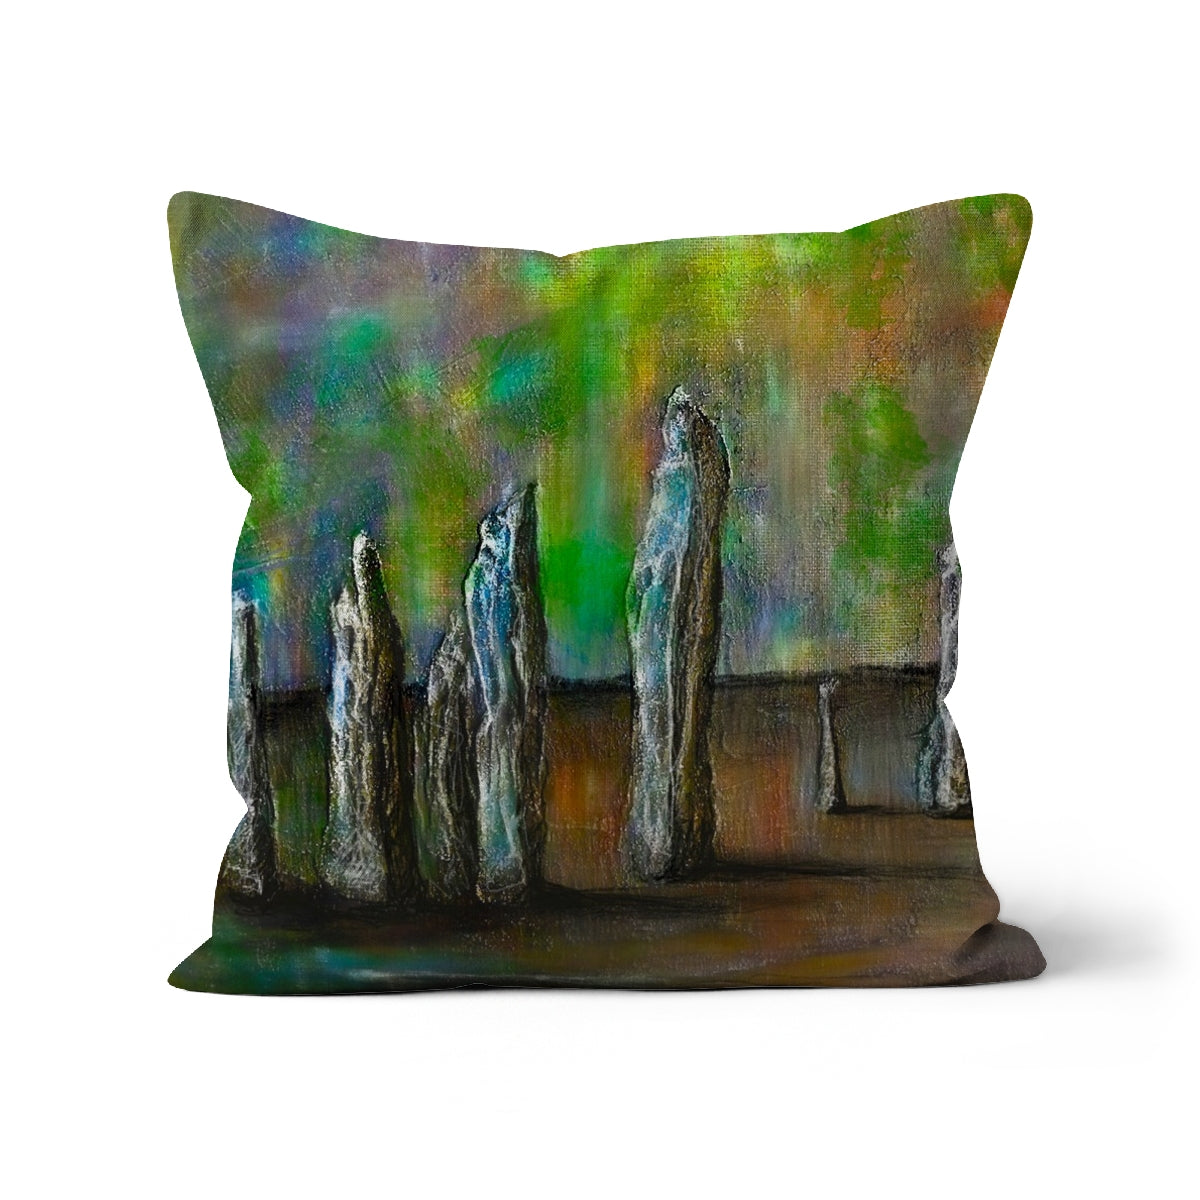 Callanish Northern Lights Art Gifts Cushion-Cushions-Hebridean Islands Art Gallery-Canvas-16"x16"-Paintings, Prints, Homeware, Art Gifts From Scotland By Scottish Artist Kevin Hunter